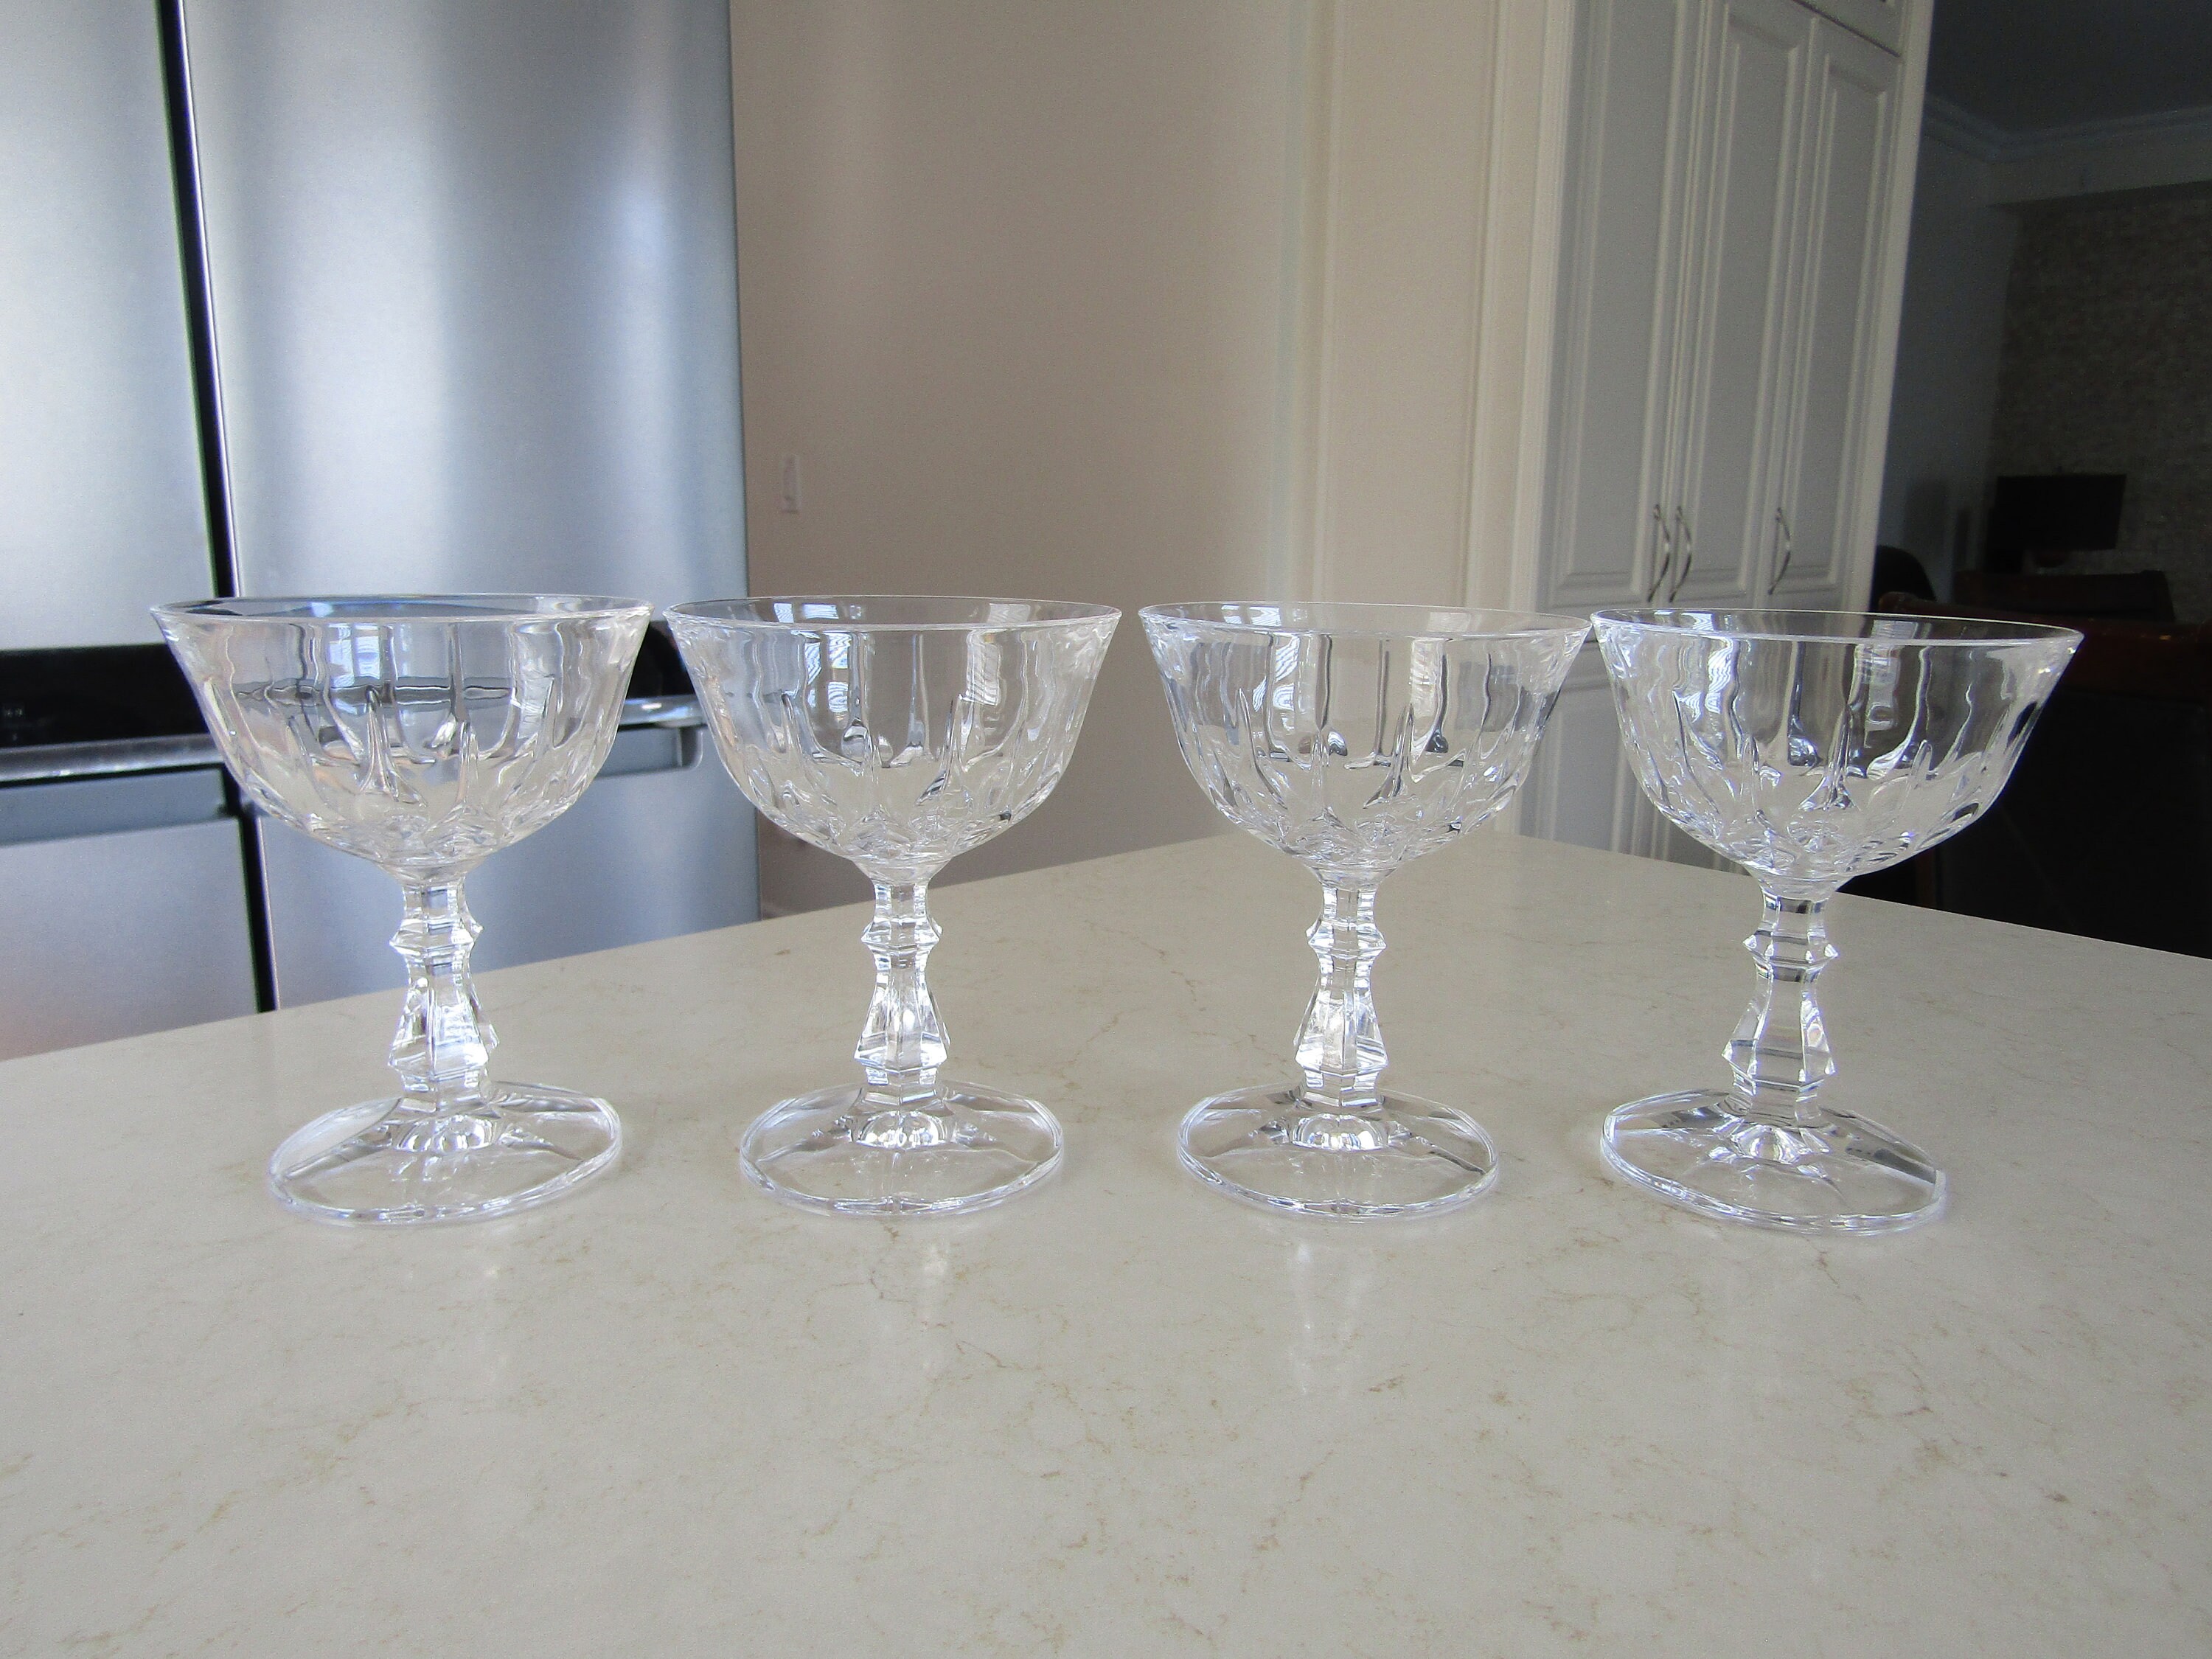 RCR Crystal for Fitting Gifts Lot de 6 coupes à champagne en